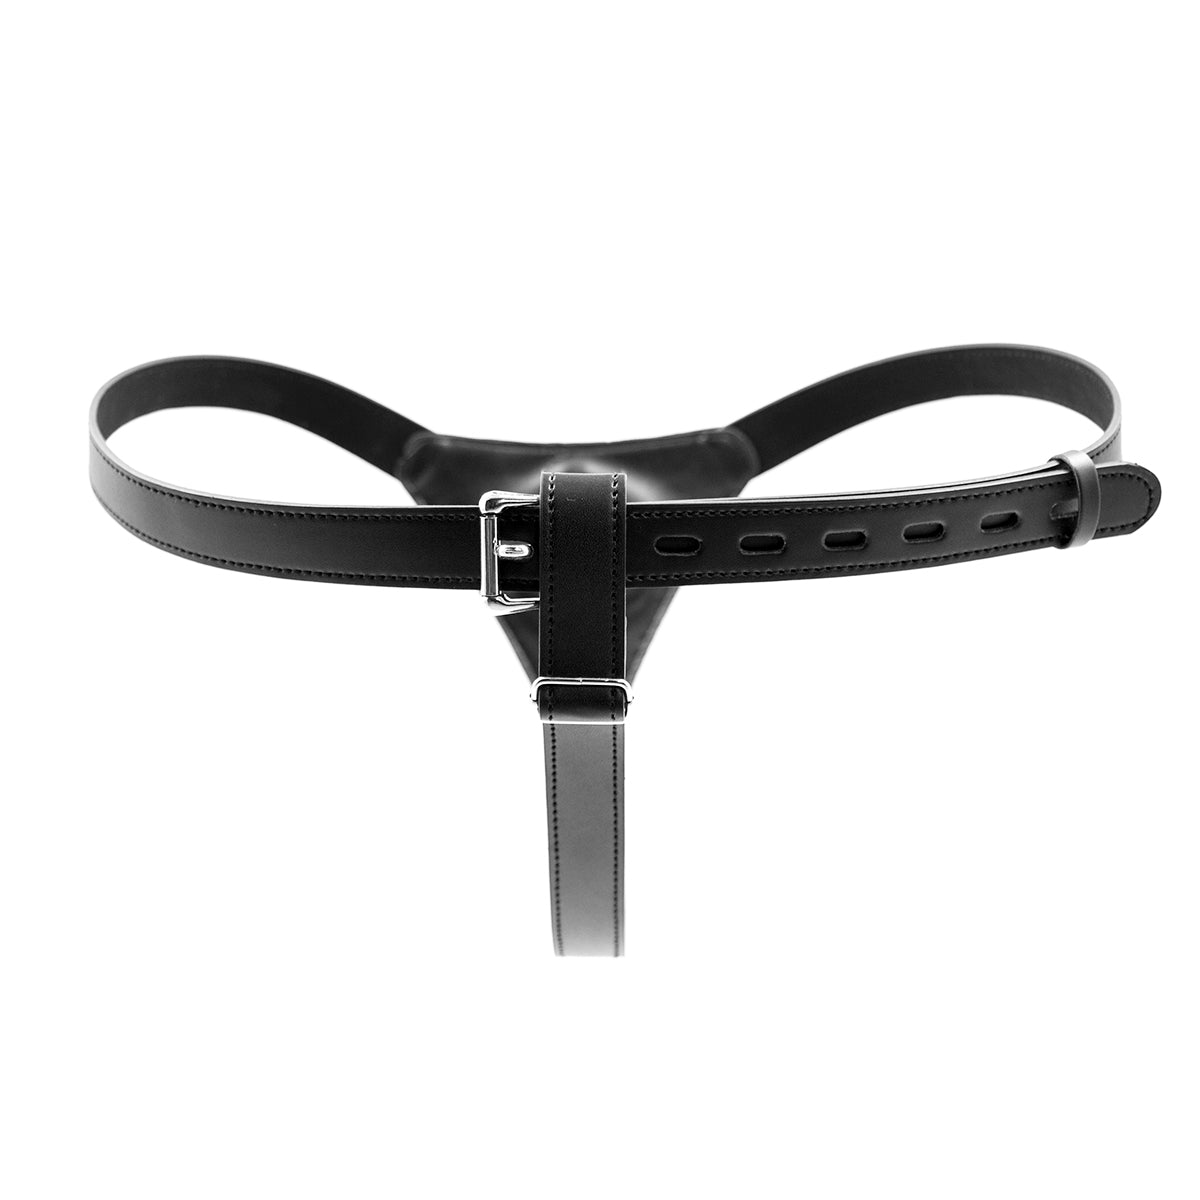 BDSM Realistic Dildo Dong Strap on Harness Penis Extender